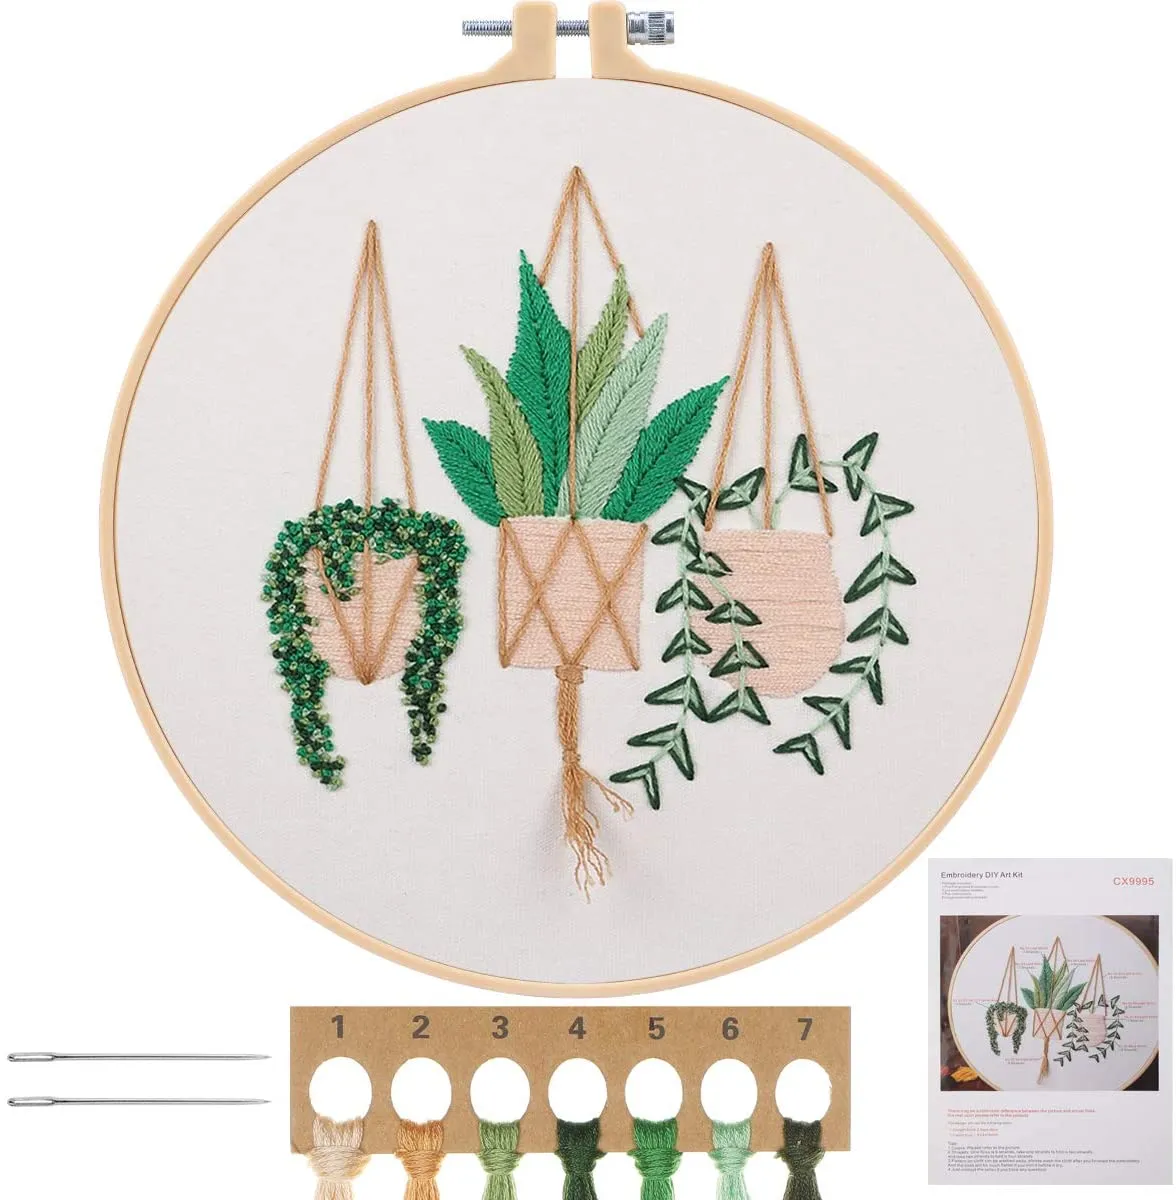 DIY Embroidery Kit Beginner, Beginner Embroidery Kit, Embroidery